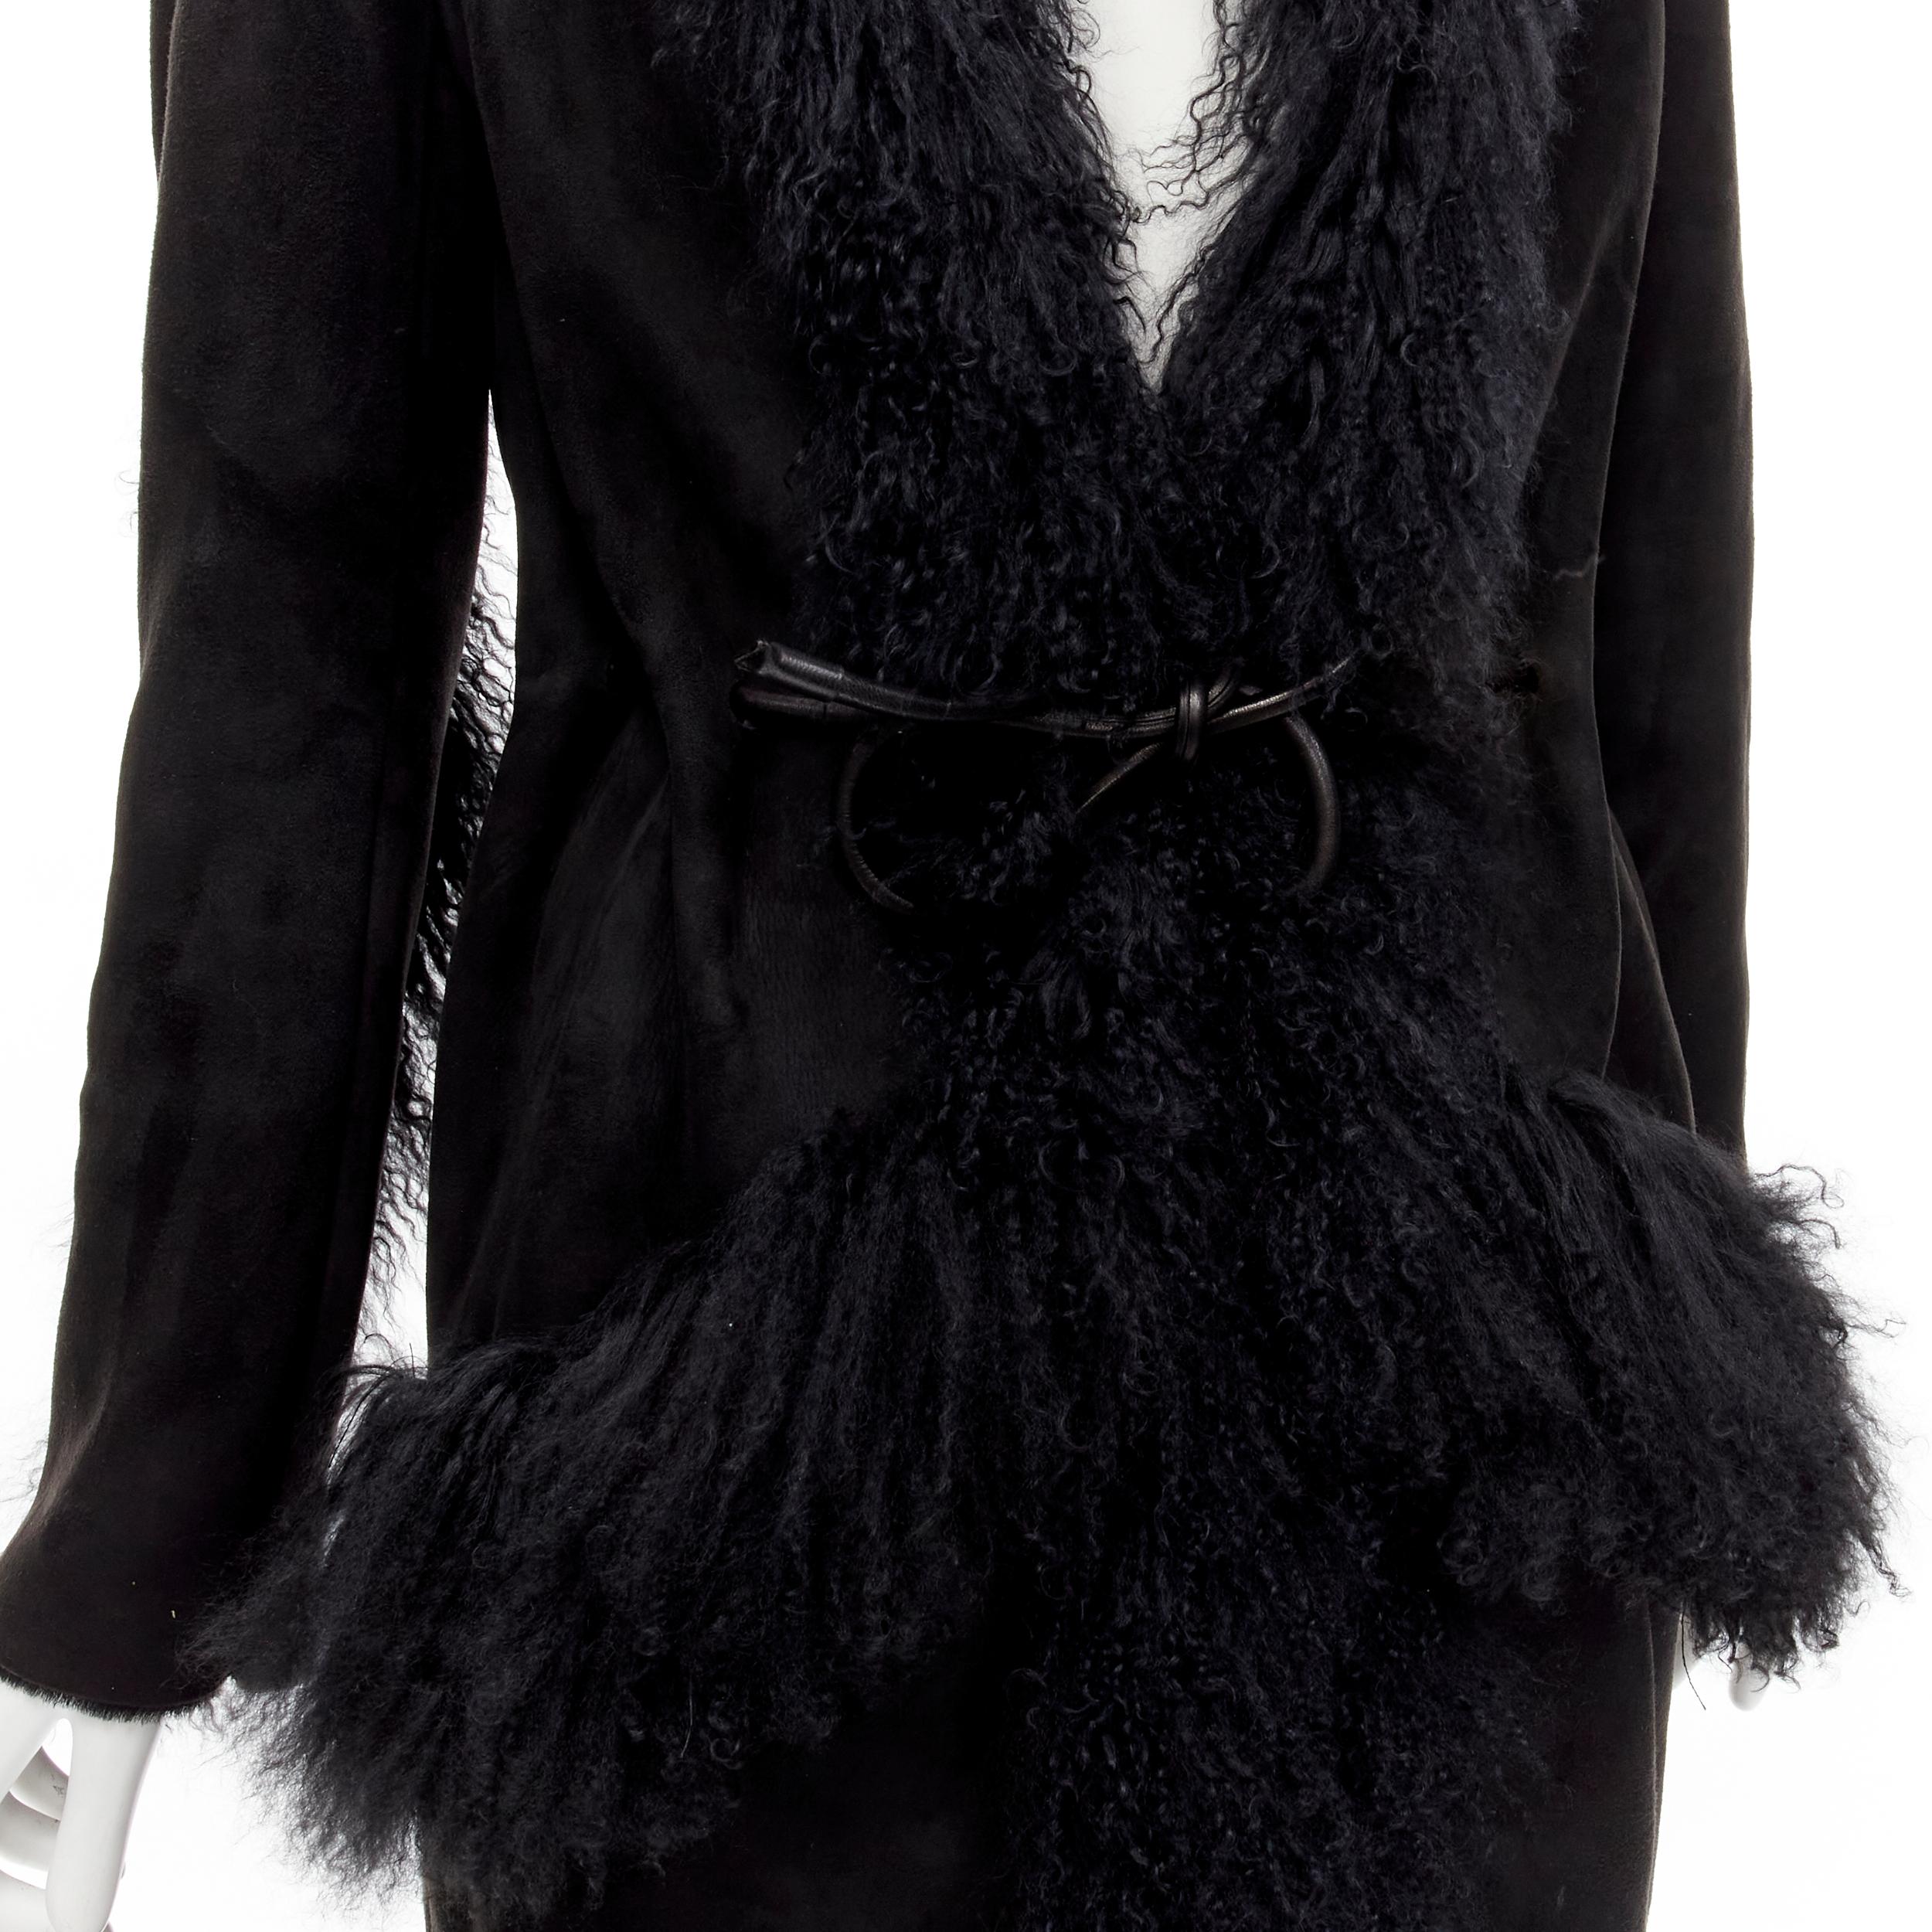 GUCCI TOM FORD 1999 Runway black shearling fur suede leather belted coat IT38 XS
Reference: TGAS/C01732
Brand: Gucci
Designer: Tom Ford
Collection: AW 1999 - Runway
Material: Shearling, Suede
Color: Black
Pattern: Solid
Closure: Self Tie
Lining: